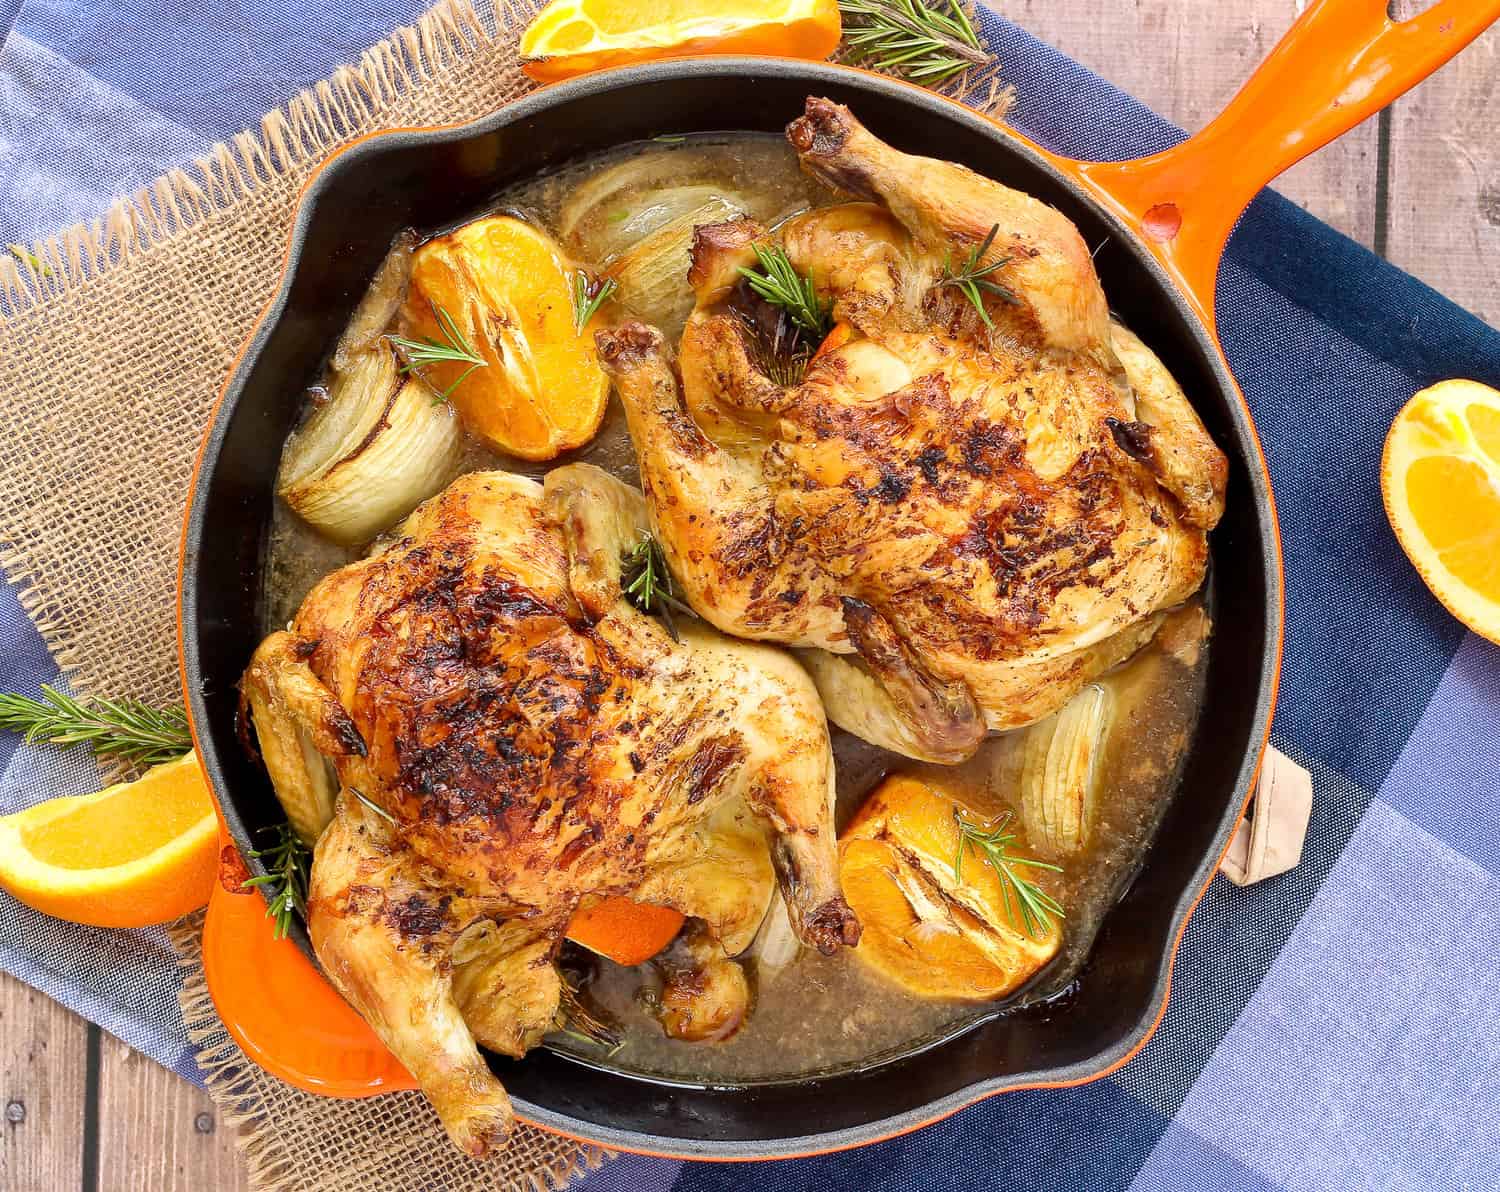 Overhead view of two cornish game hens in a orange skillet, with orange slices.